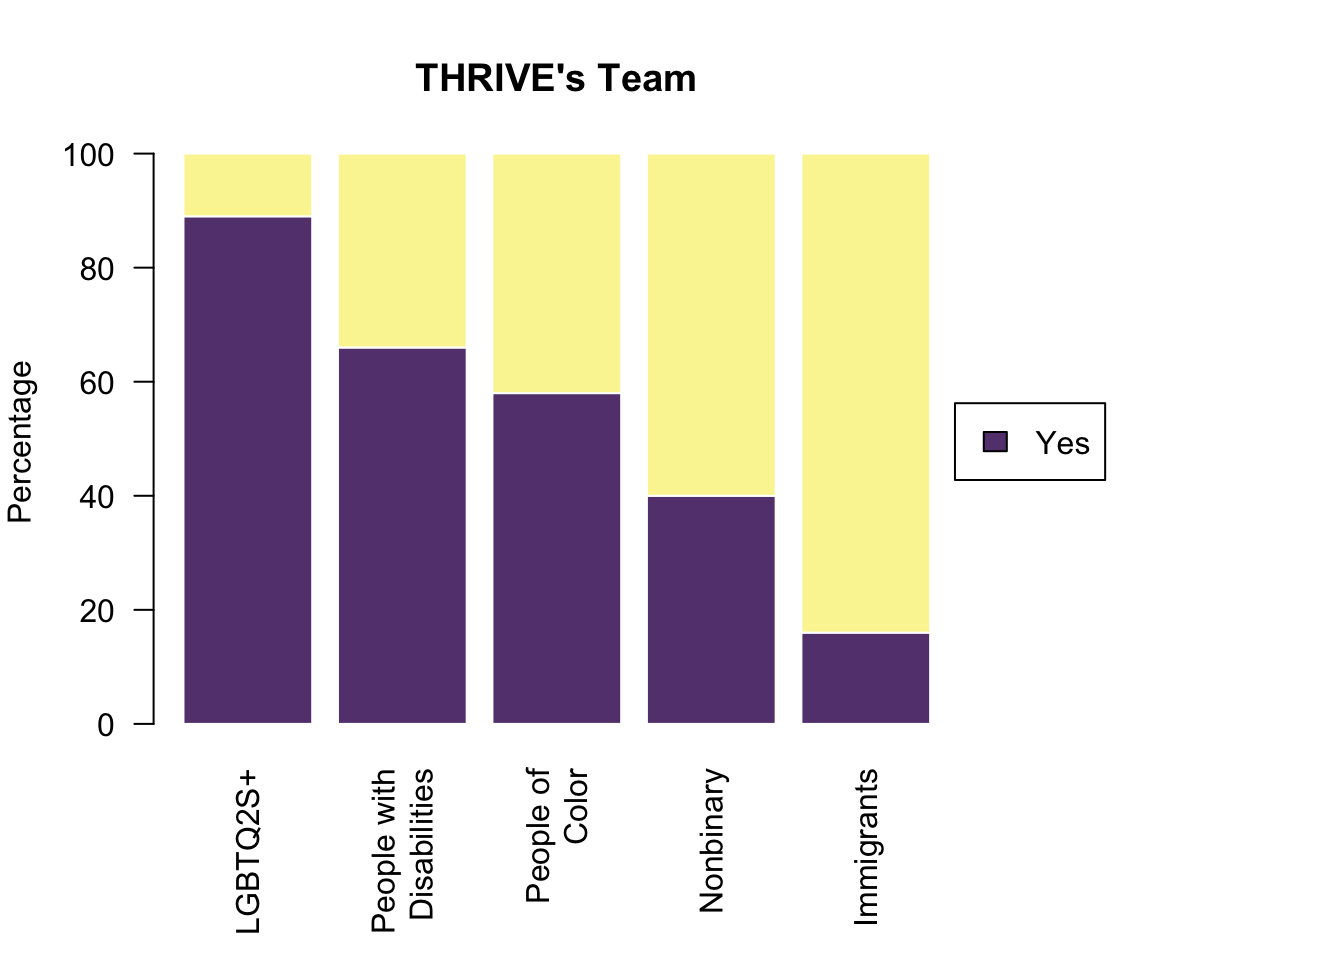 Barplot of the identities of the THRIVE Lifeline team. LGBTQ2S+ makes up 80%, people of color make up 63%, people with disabilities make up 54%, trans people make up 40%, and immigrants make up 19%.